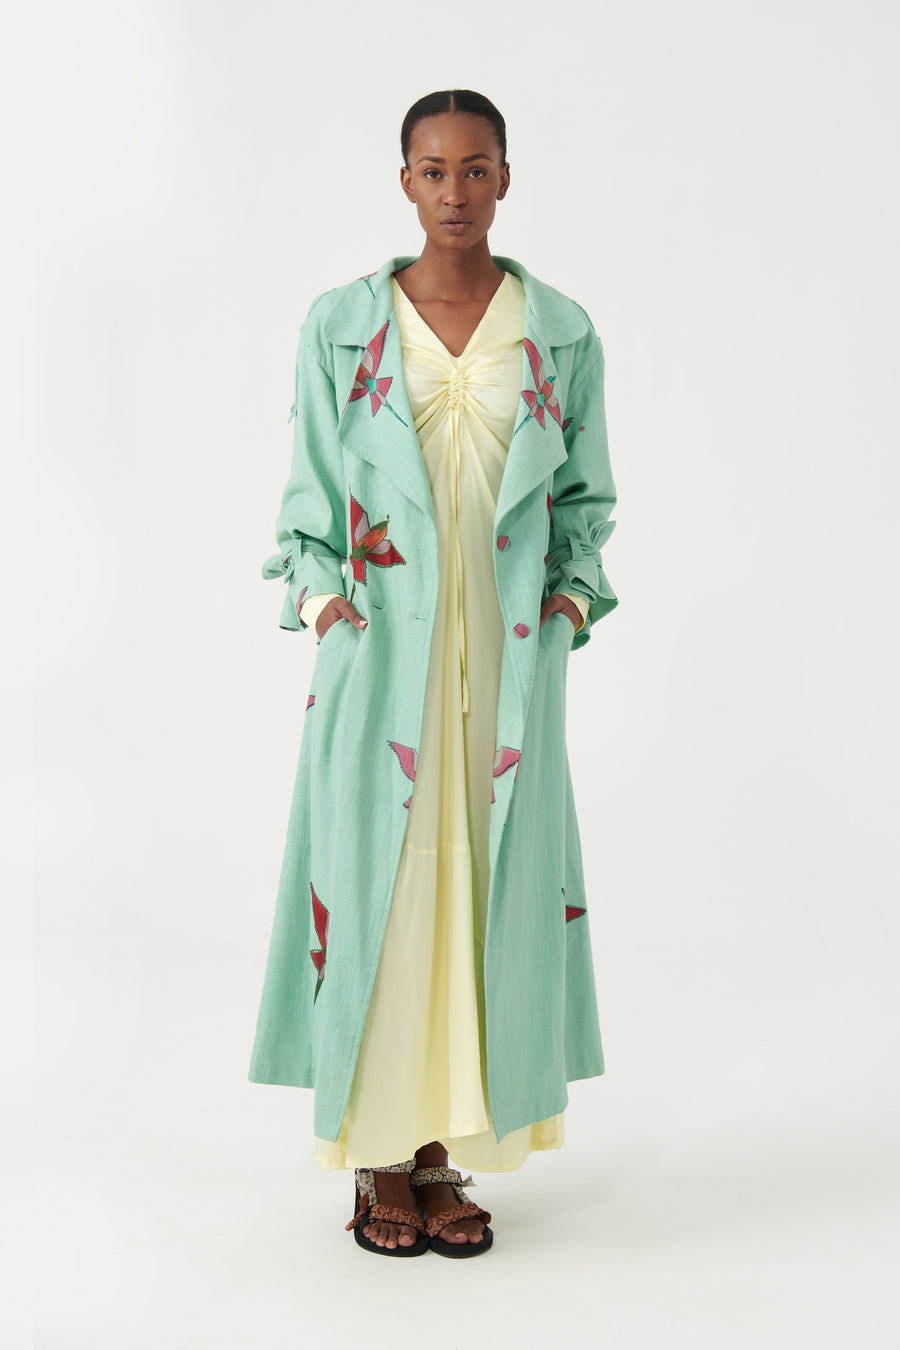 Bee Eater embroidered Trench Coat